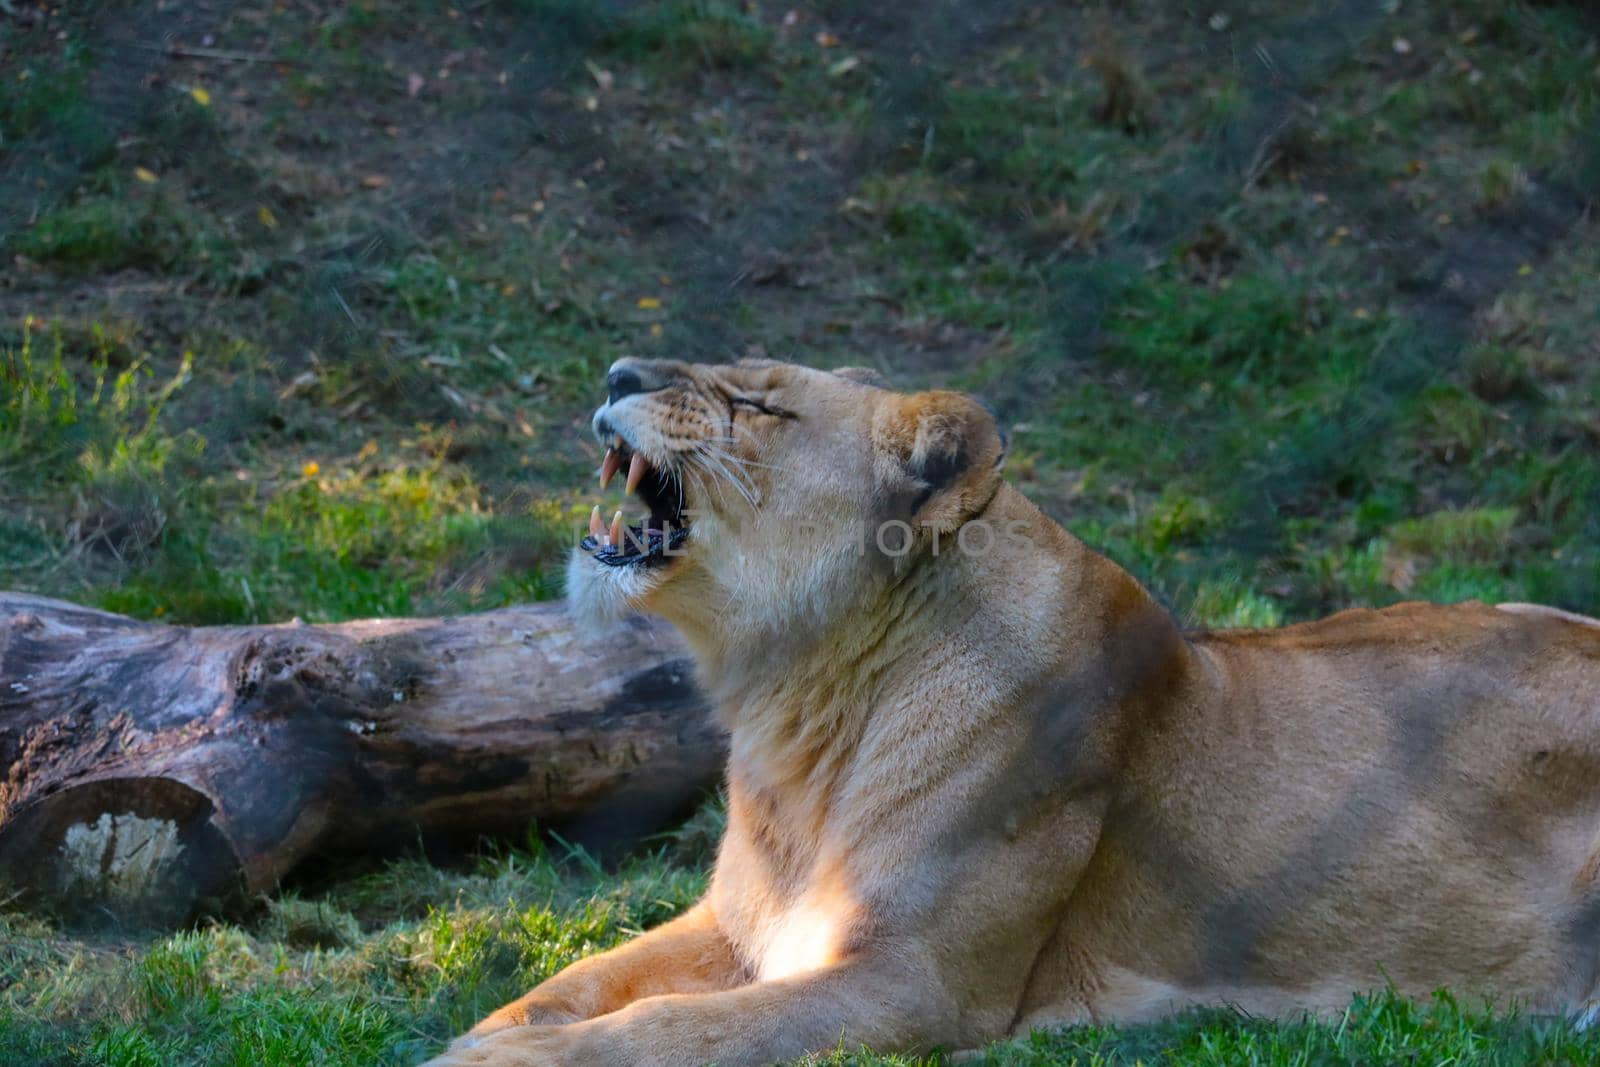 The lioness lies on the ground with her mouth open